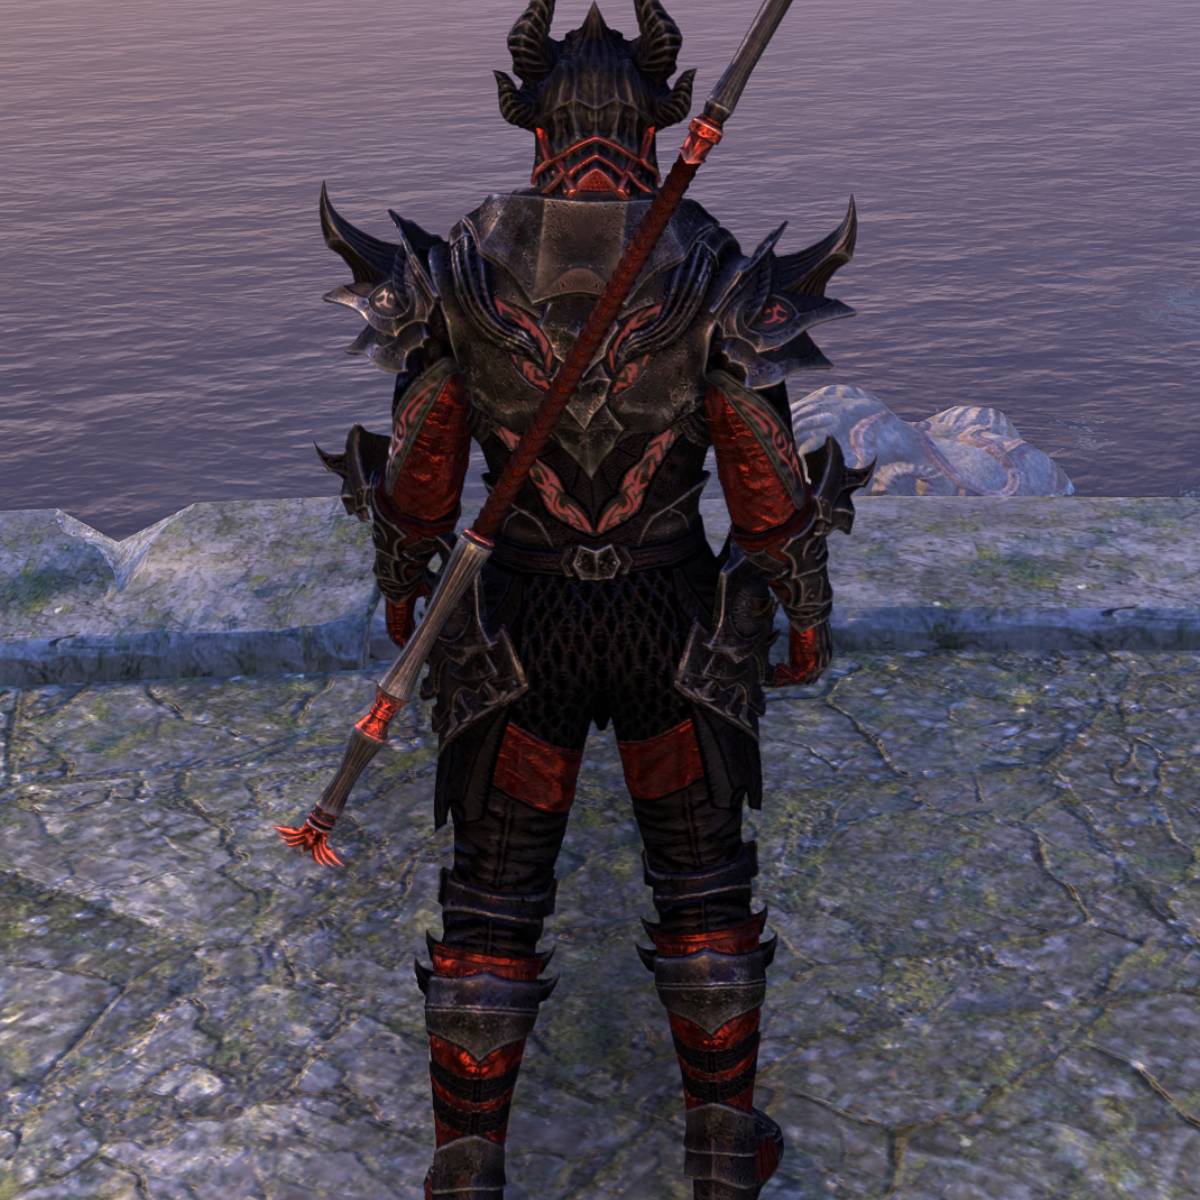 Blaze Magicka Dragonknight PVP Build for ESO Outfit 2